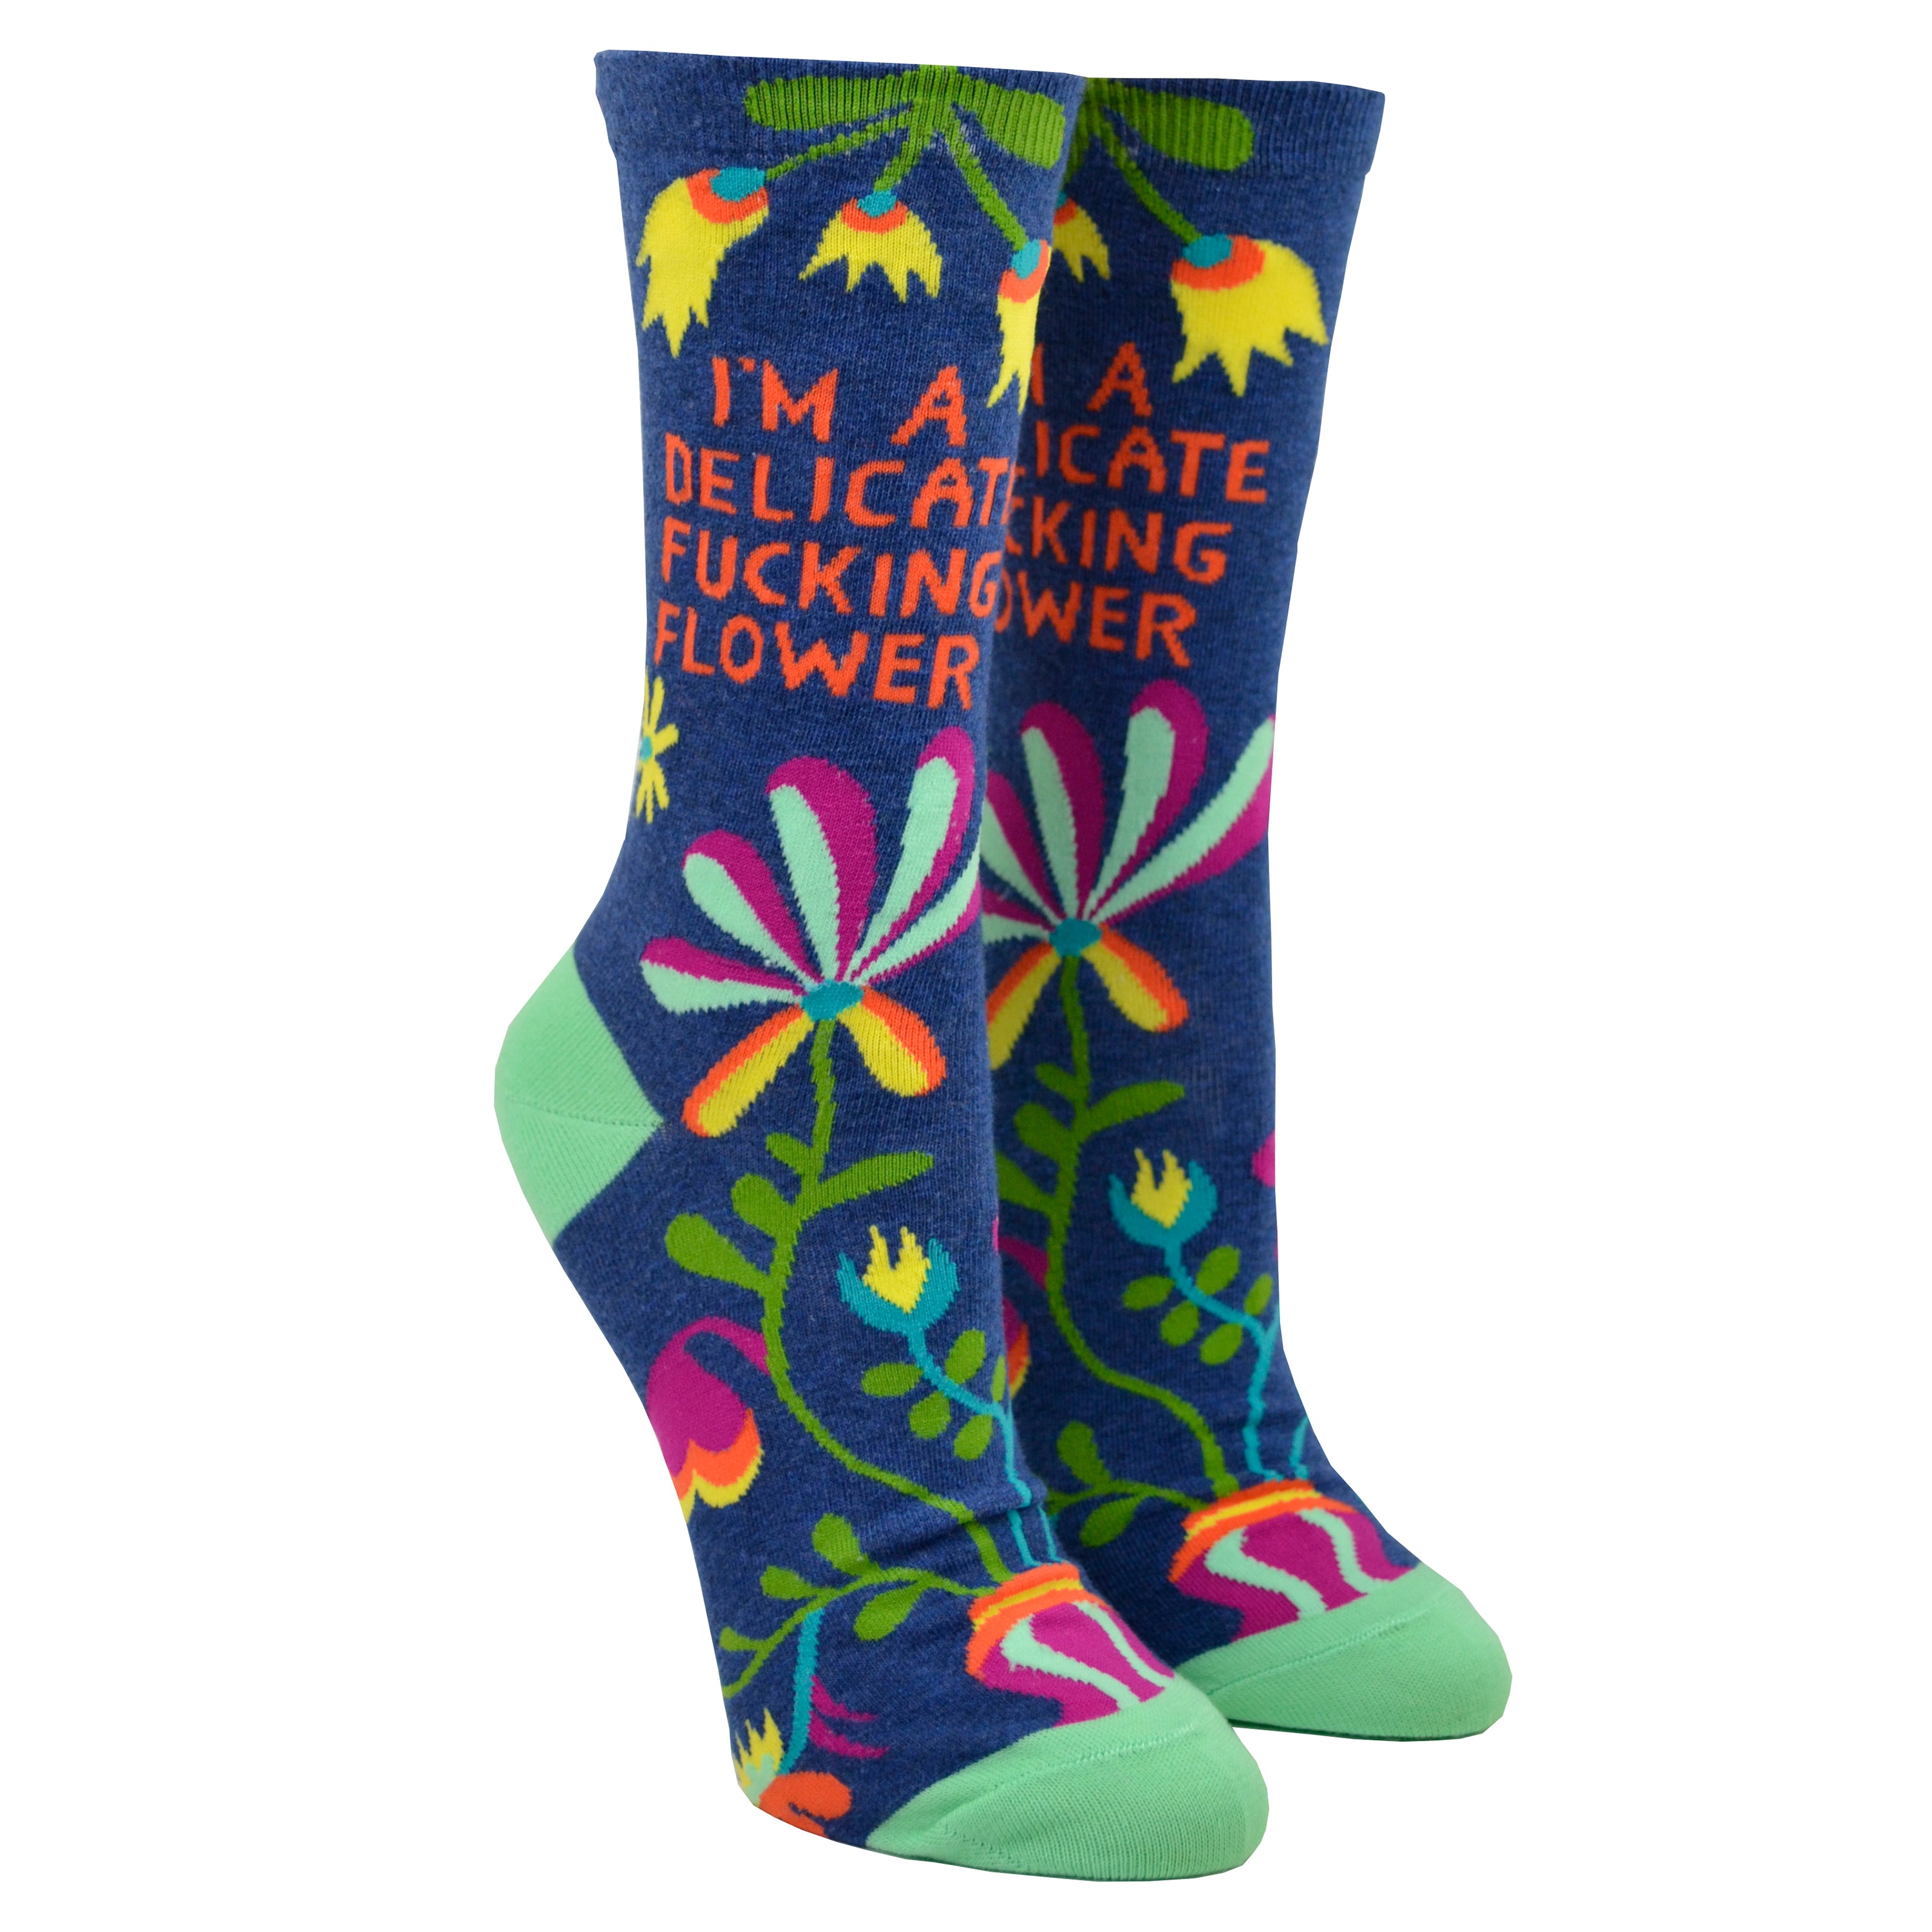 Shown on leg forms from the text side, a pair of Blue Q brand women's nylon and combed cotton socks in navy blue with a teal heel and toe. These socks feature an all over motif of psychedelic inspired flowers and the phrase 